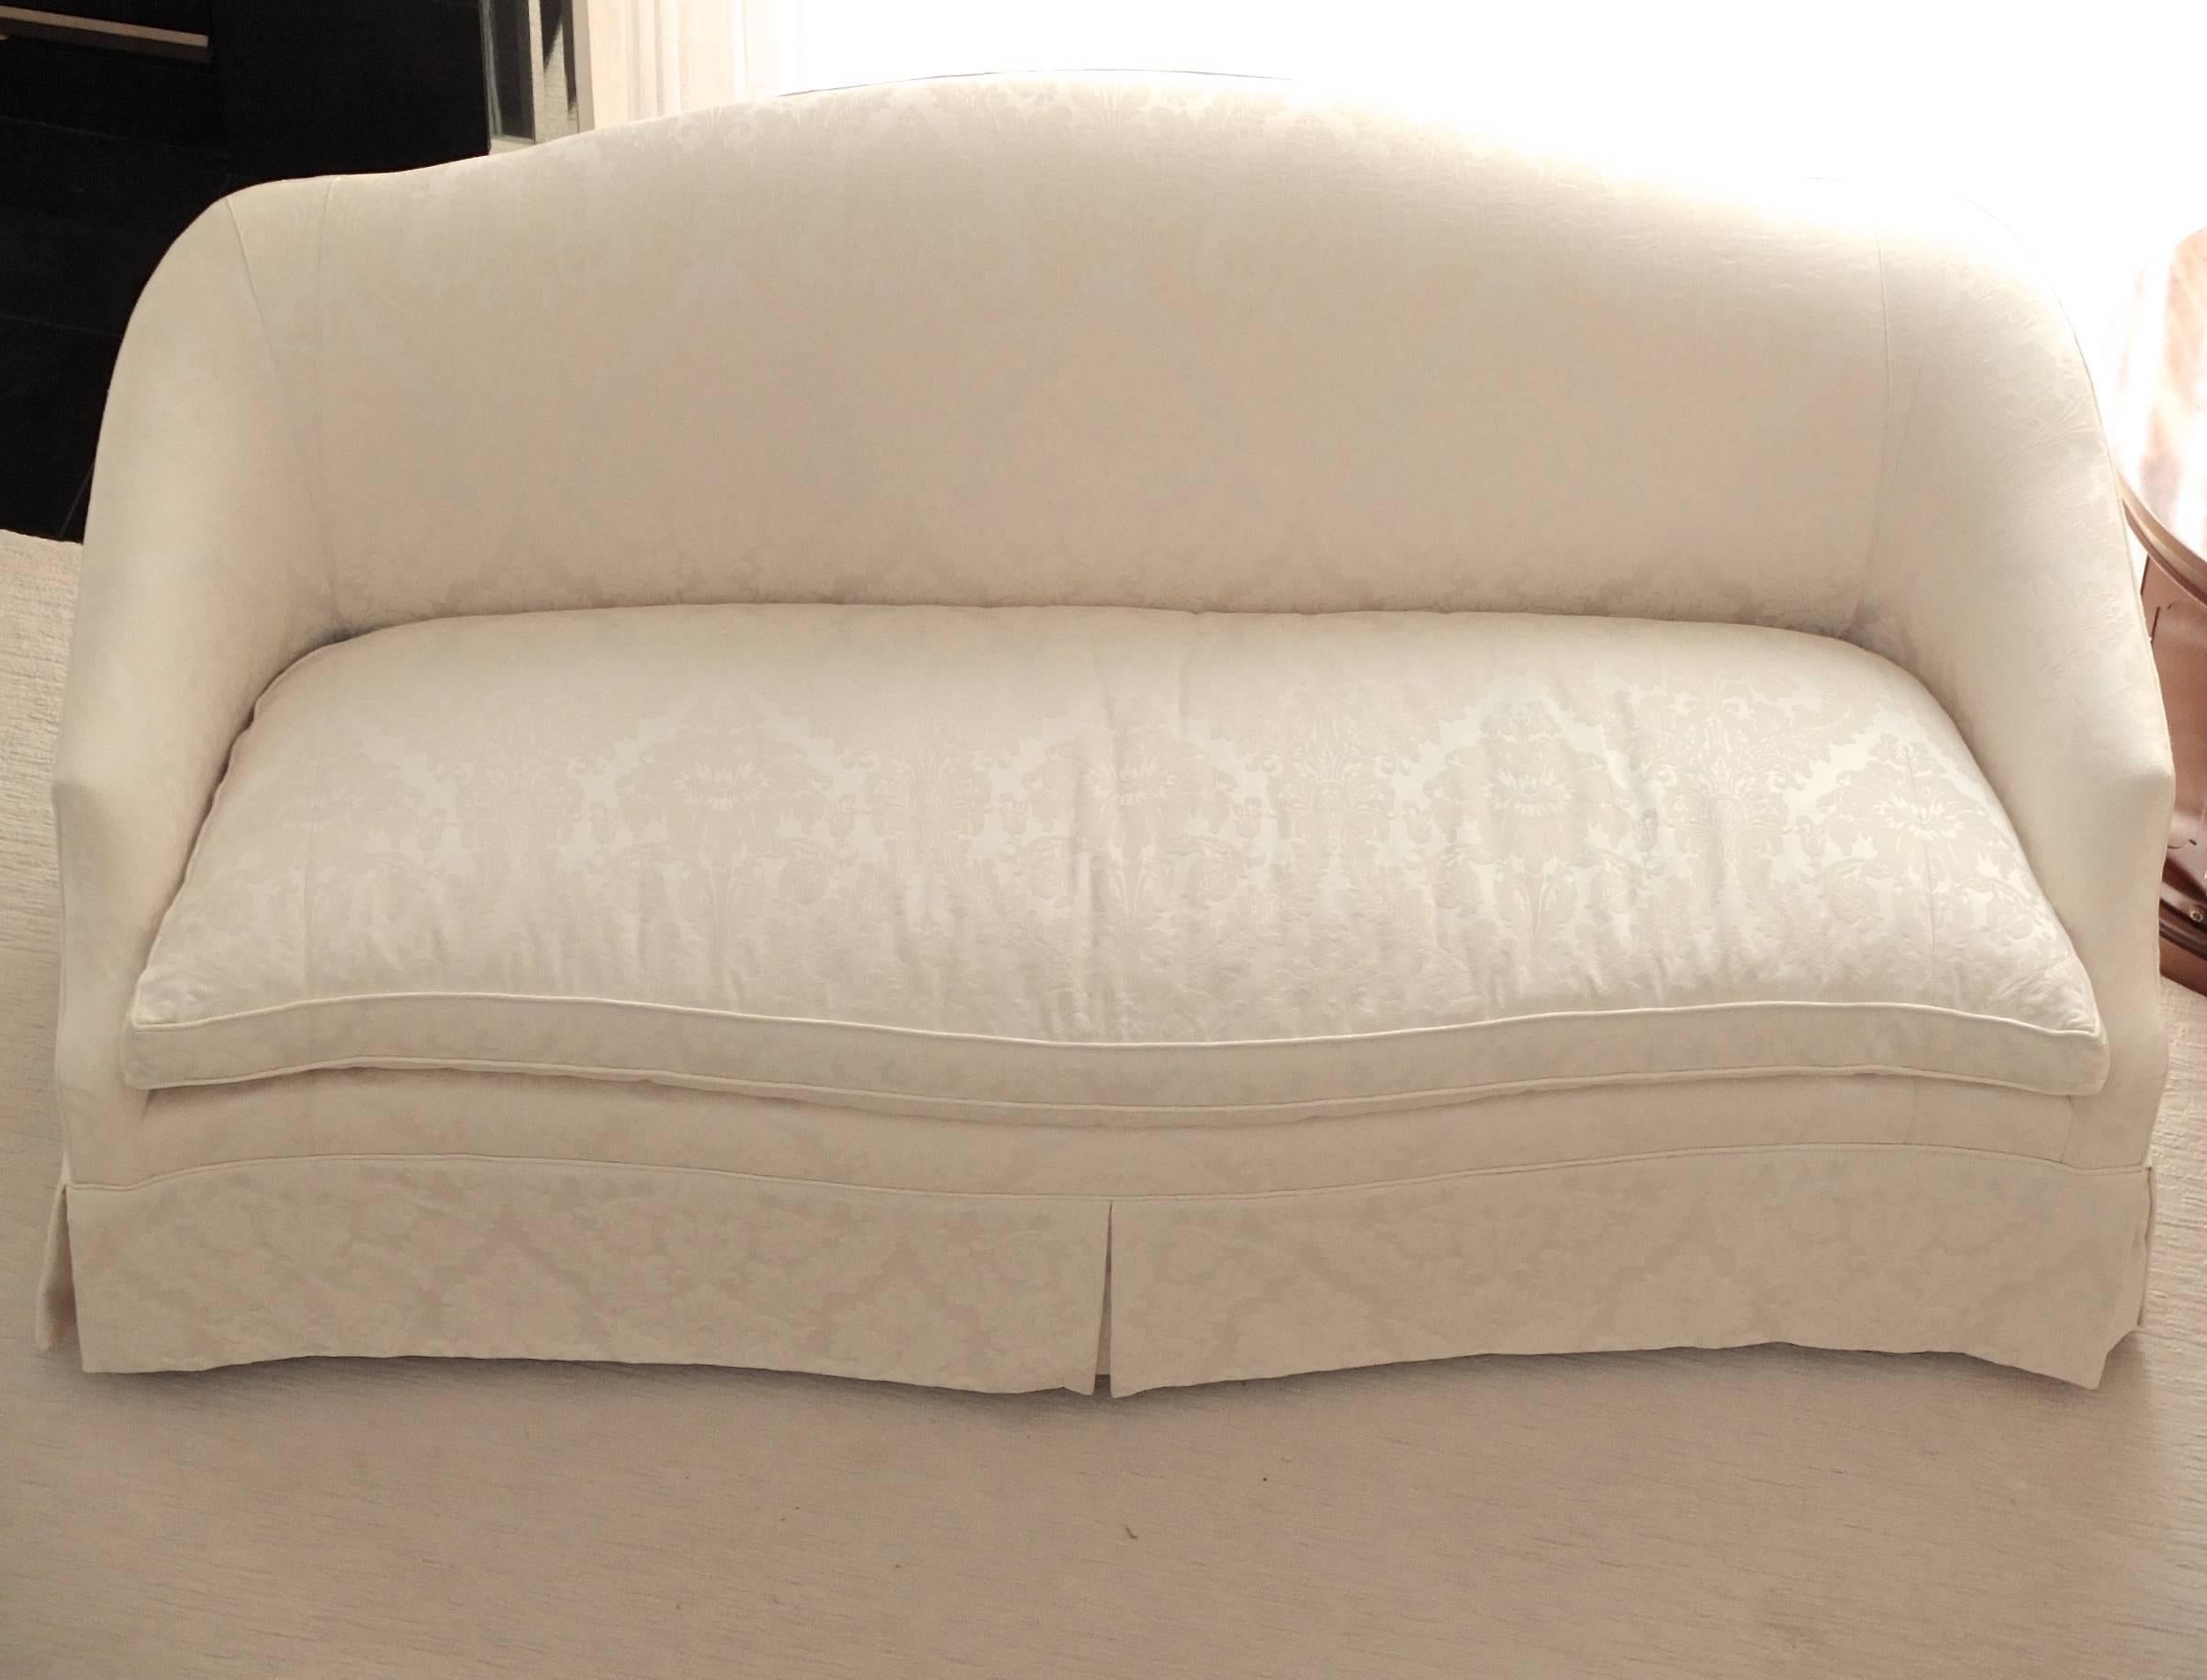 Late 20th Century Ivory Silk Damask Sofa by Drexel Heritage